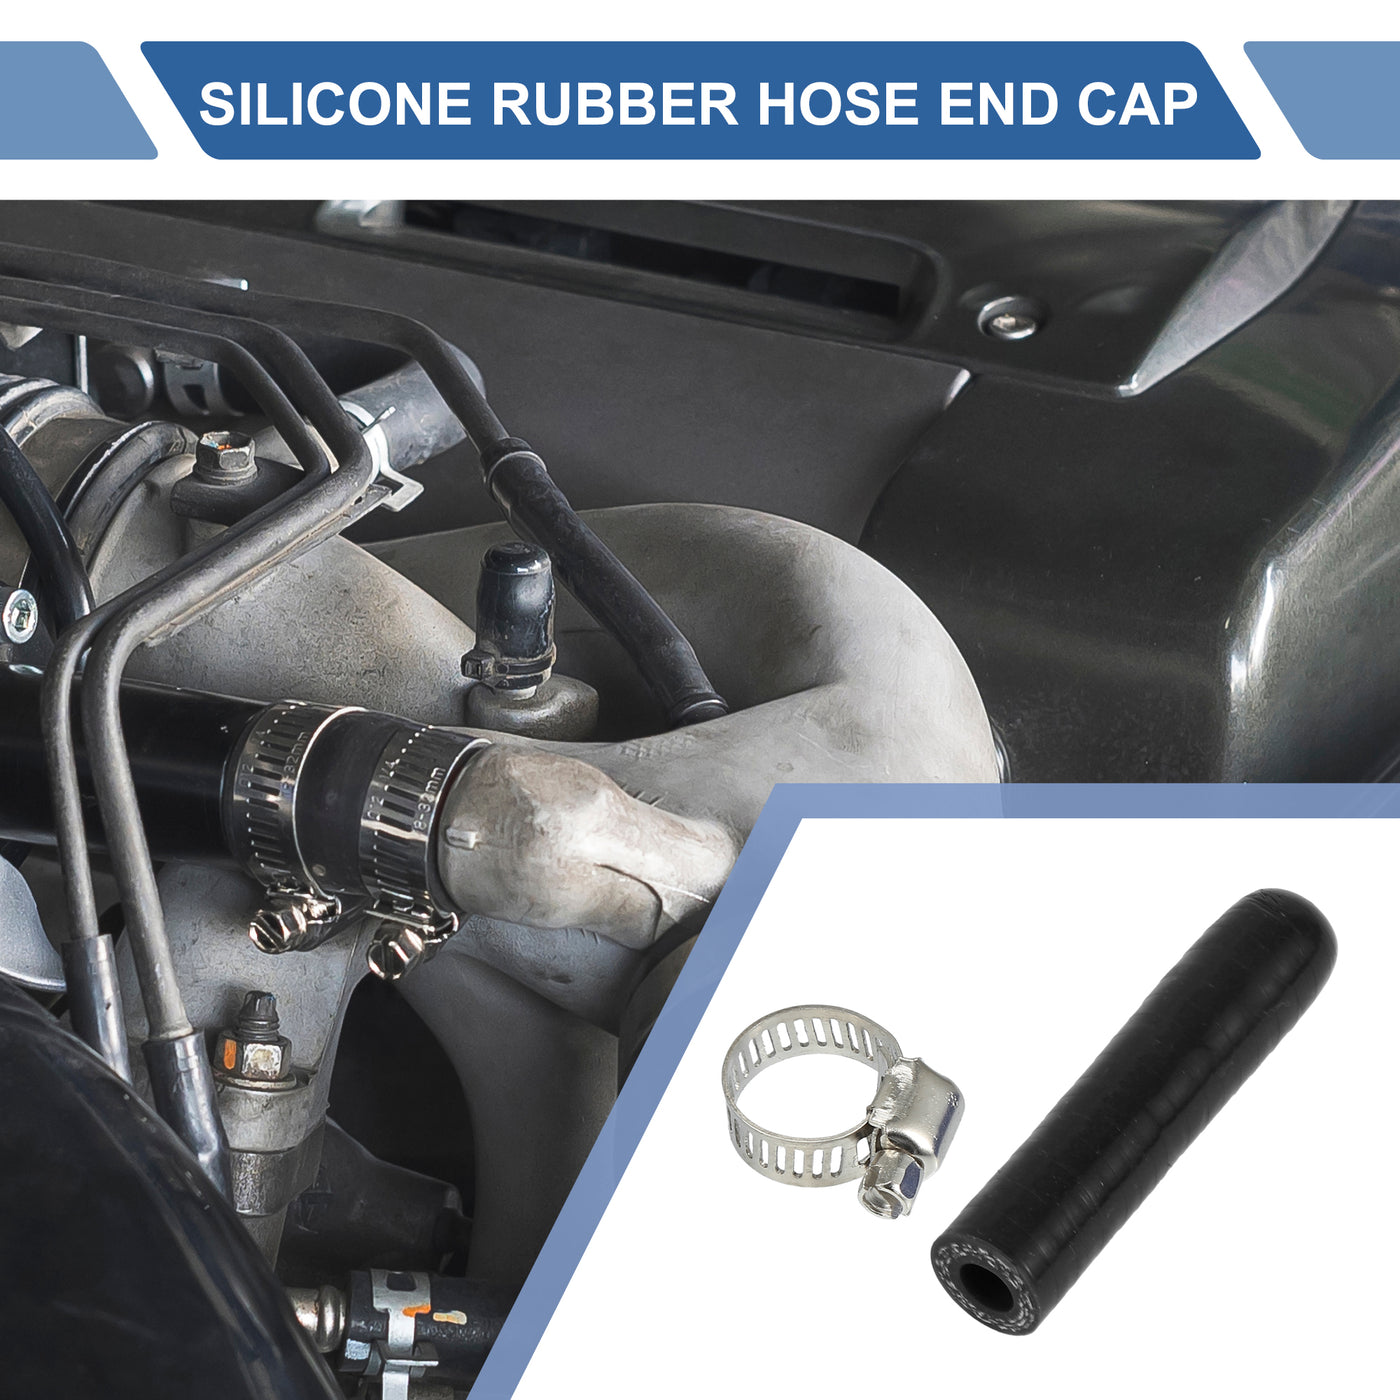 X AUTOHAUX 1 Pcs 60mm Length 8mm/0.31" ID Black Car Silicone Rubber Hose End Cap with Clamp Silicone Reinforced Blanking Cap for Bypass Tube Universal